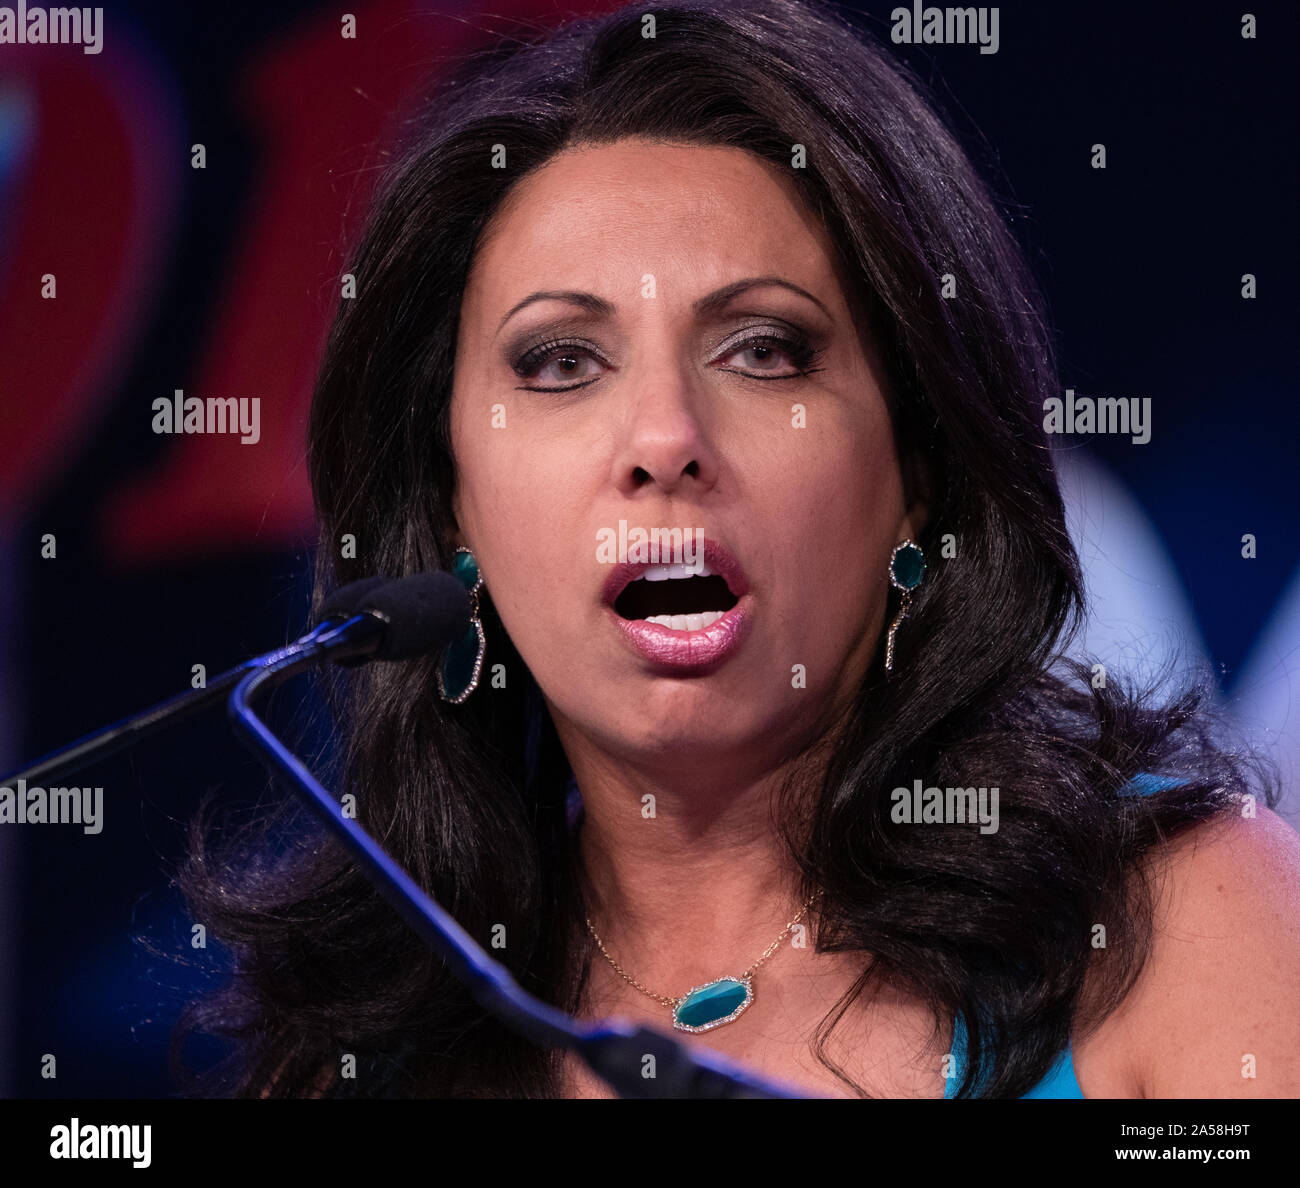 Washington, United States Of America. 12th Oct, 2019. Brigitte Gabriel, Founder and President of the anti-Islam group Act for America, speaks at the Values Voter Summit, a conference of Christian religious and social conservatives at the Omni Shoreham Hotel in Washington, DC on Saturday, October 12, 2019. The Values Voter Summit is produced and hosted by FRC Action, the political arm of the Family Research Council. (Photo by Jeff Malet) Photo via Credit: Newscom/Alamy Live News Stock Photo